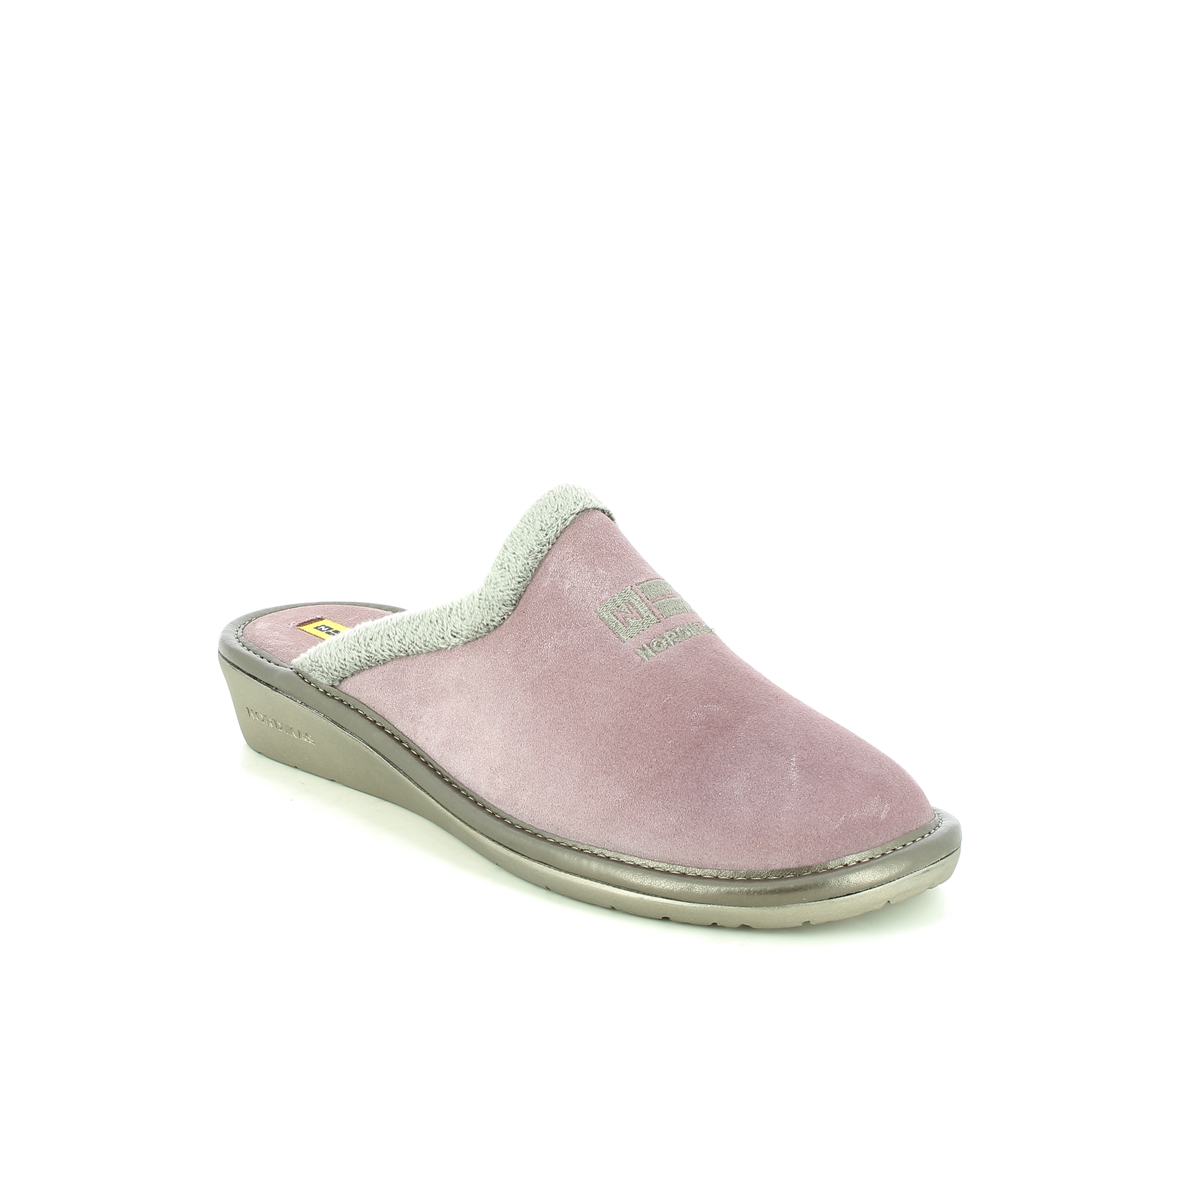 Nordikas Musue Pink Suede Womens Slipper Mules 238O-8   Natala 3 In Size 40 In Plain Pink Suede